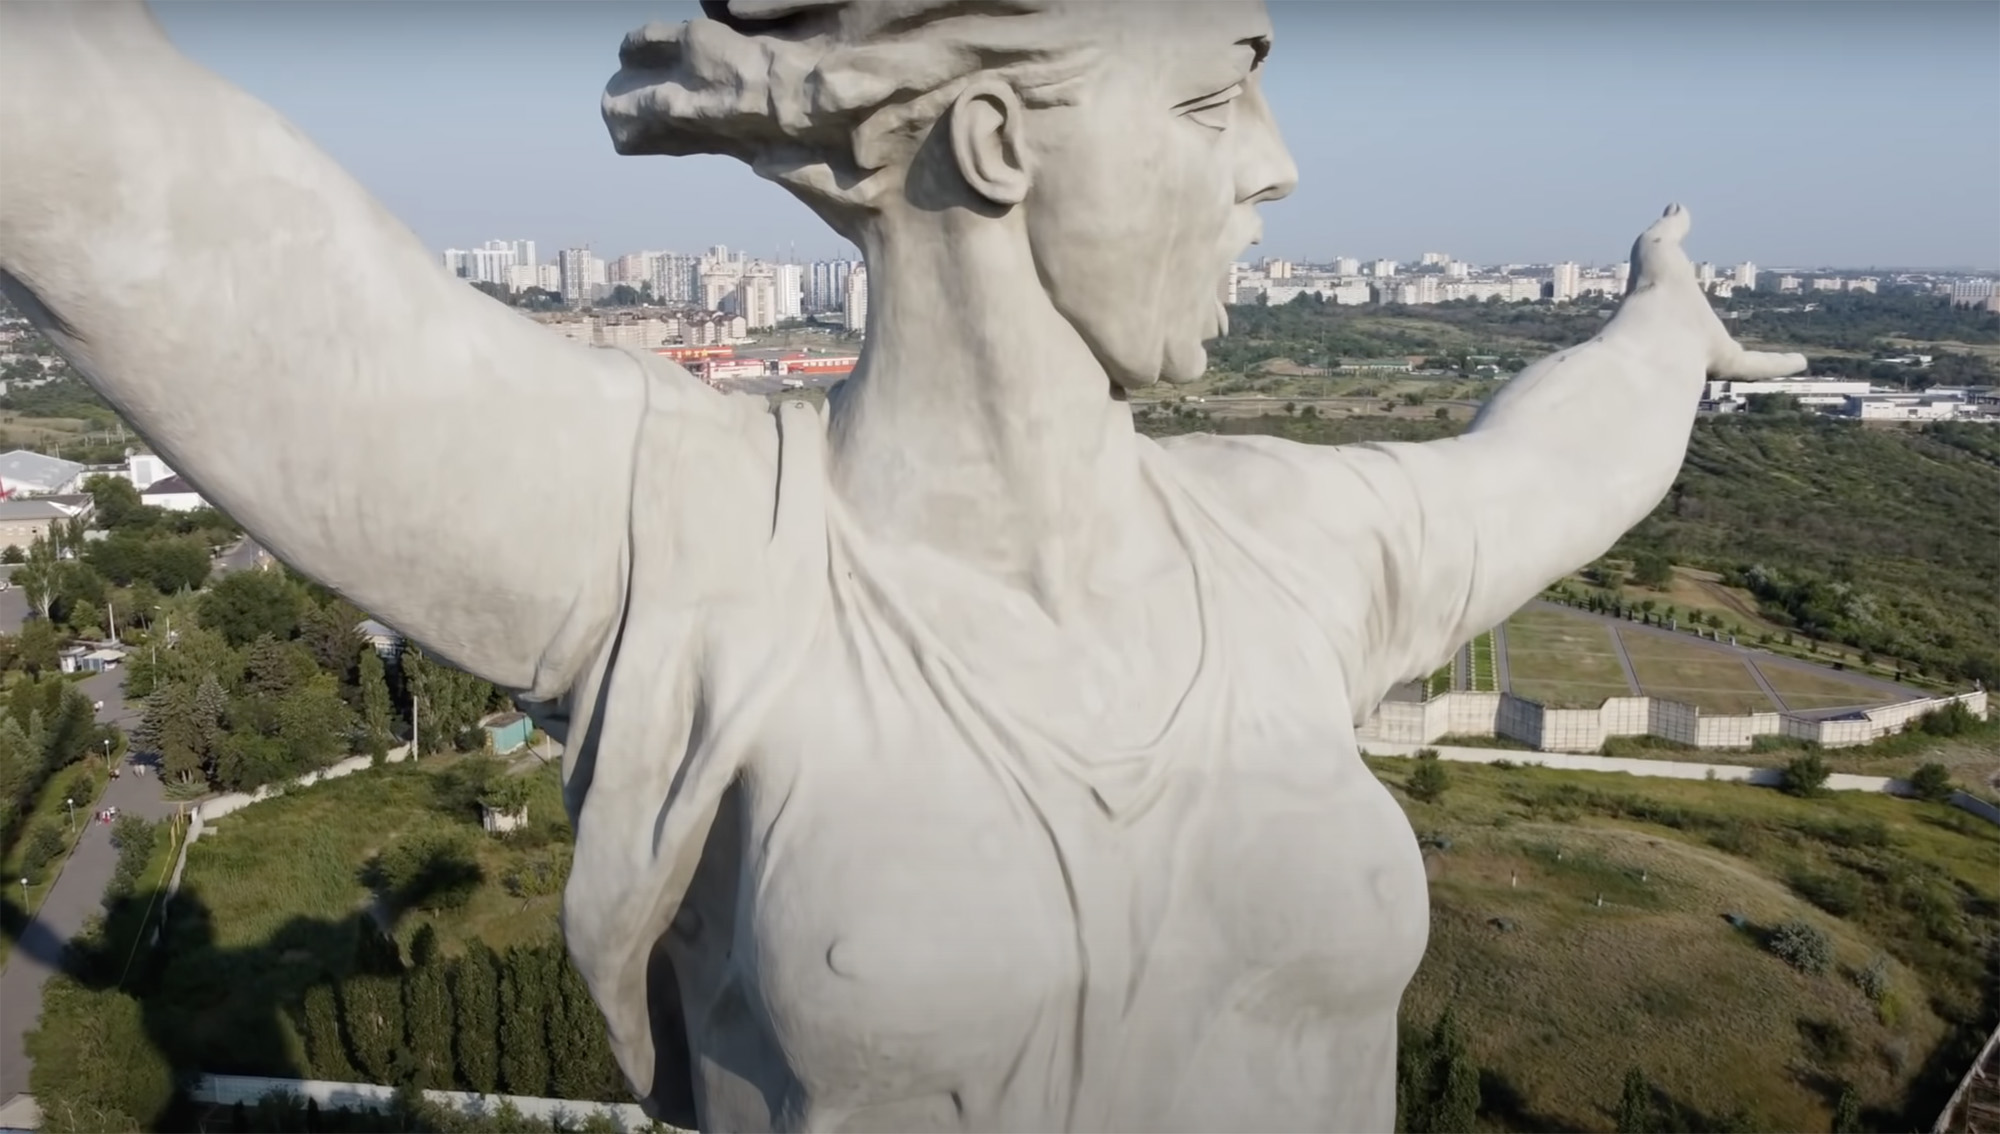 The Motherland Calls war monument commemorates heroes of the WW2